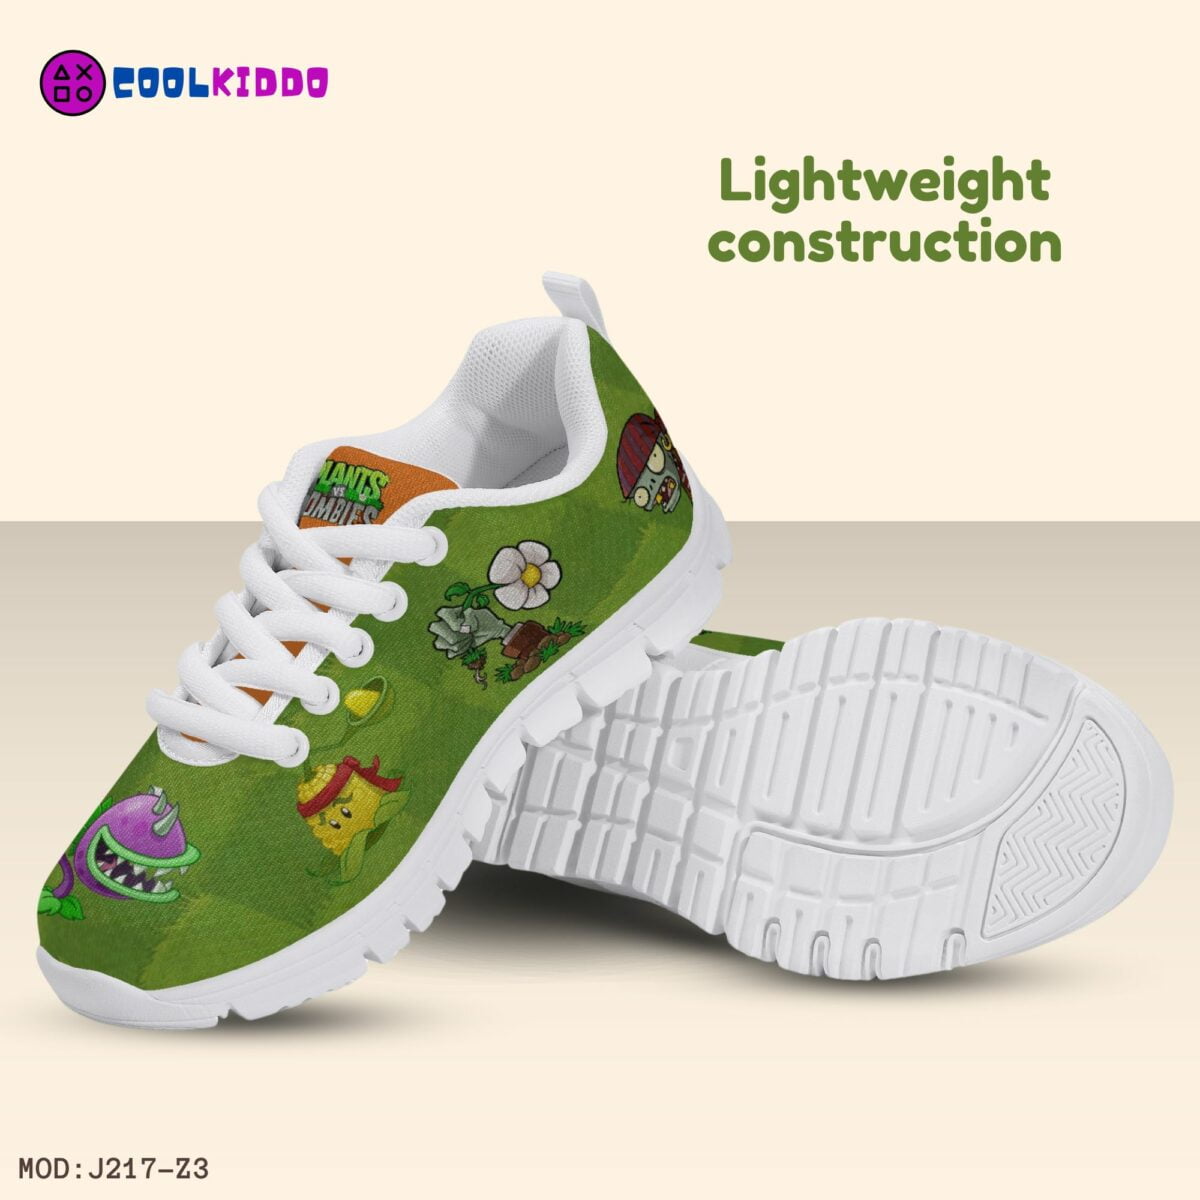 Personalized Plants vs Zombies Inspired Kids’ Lightweight Mesh Sneakers Cool Kiddo 12